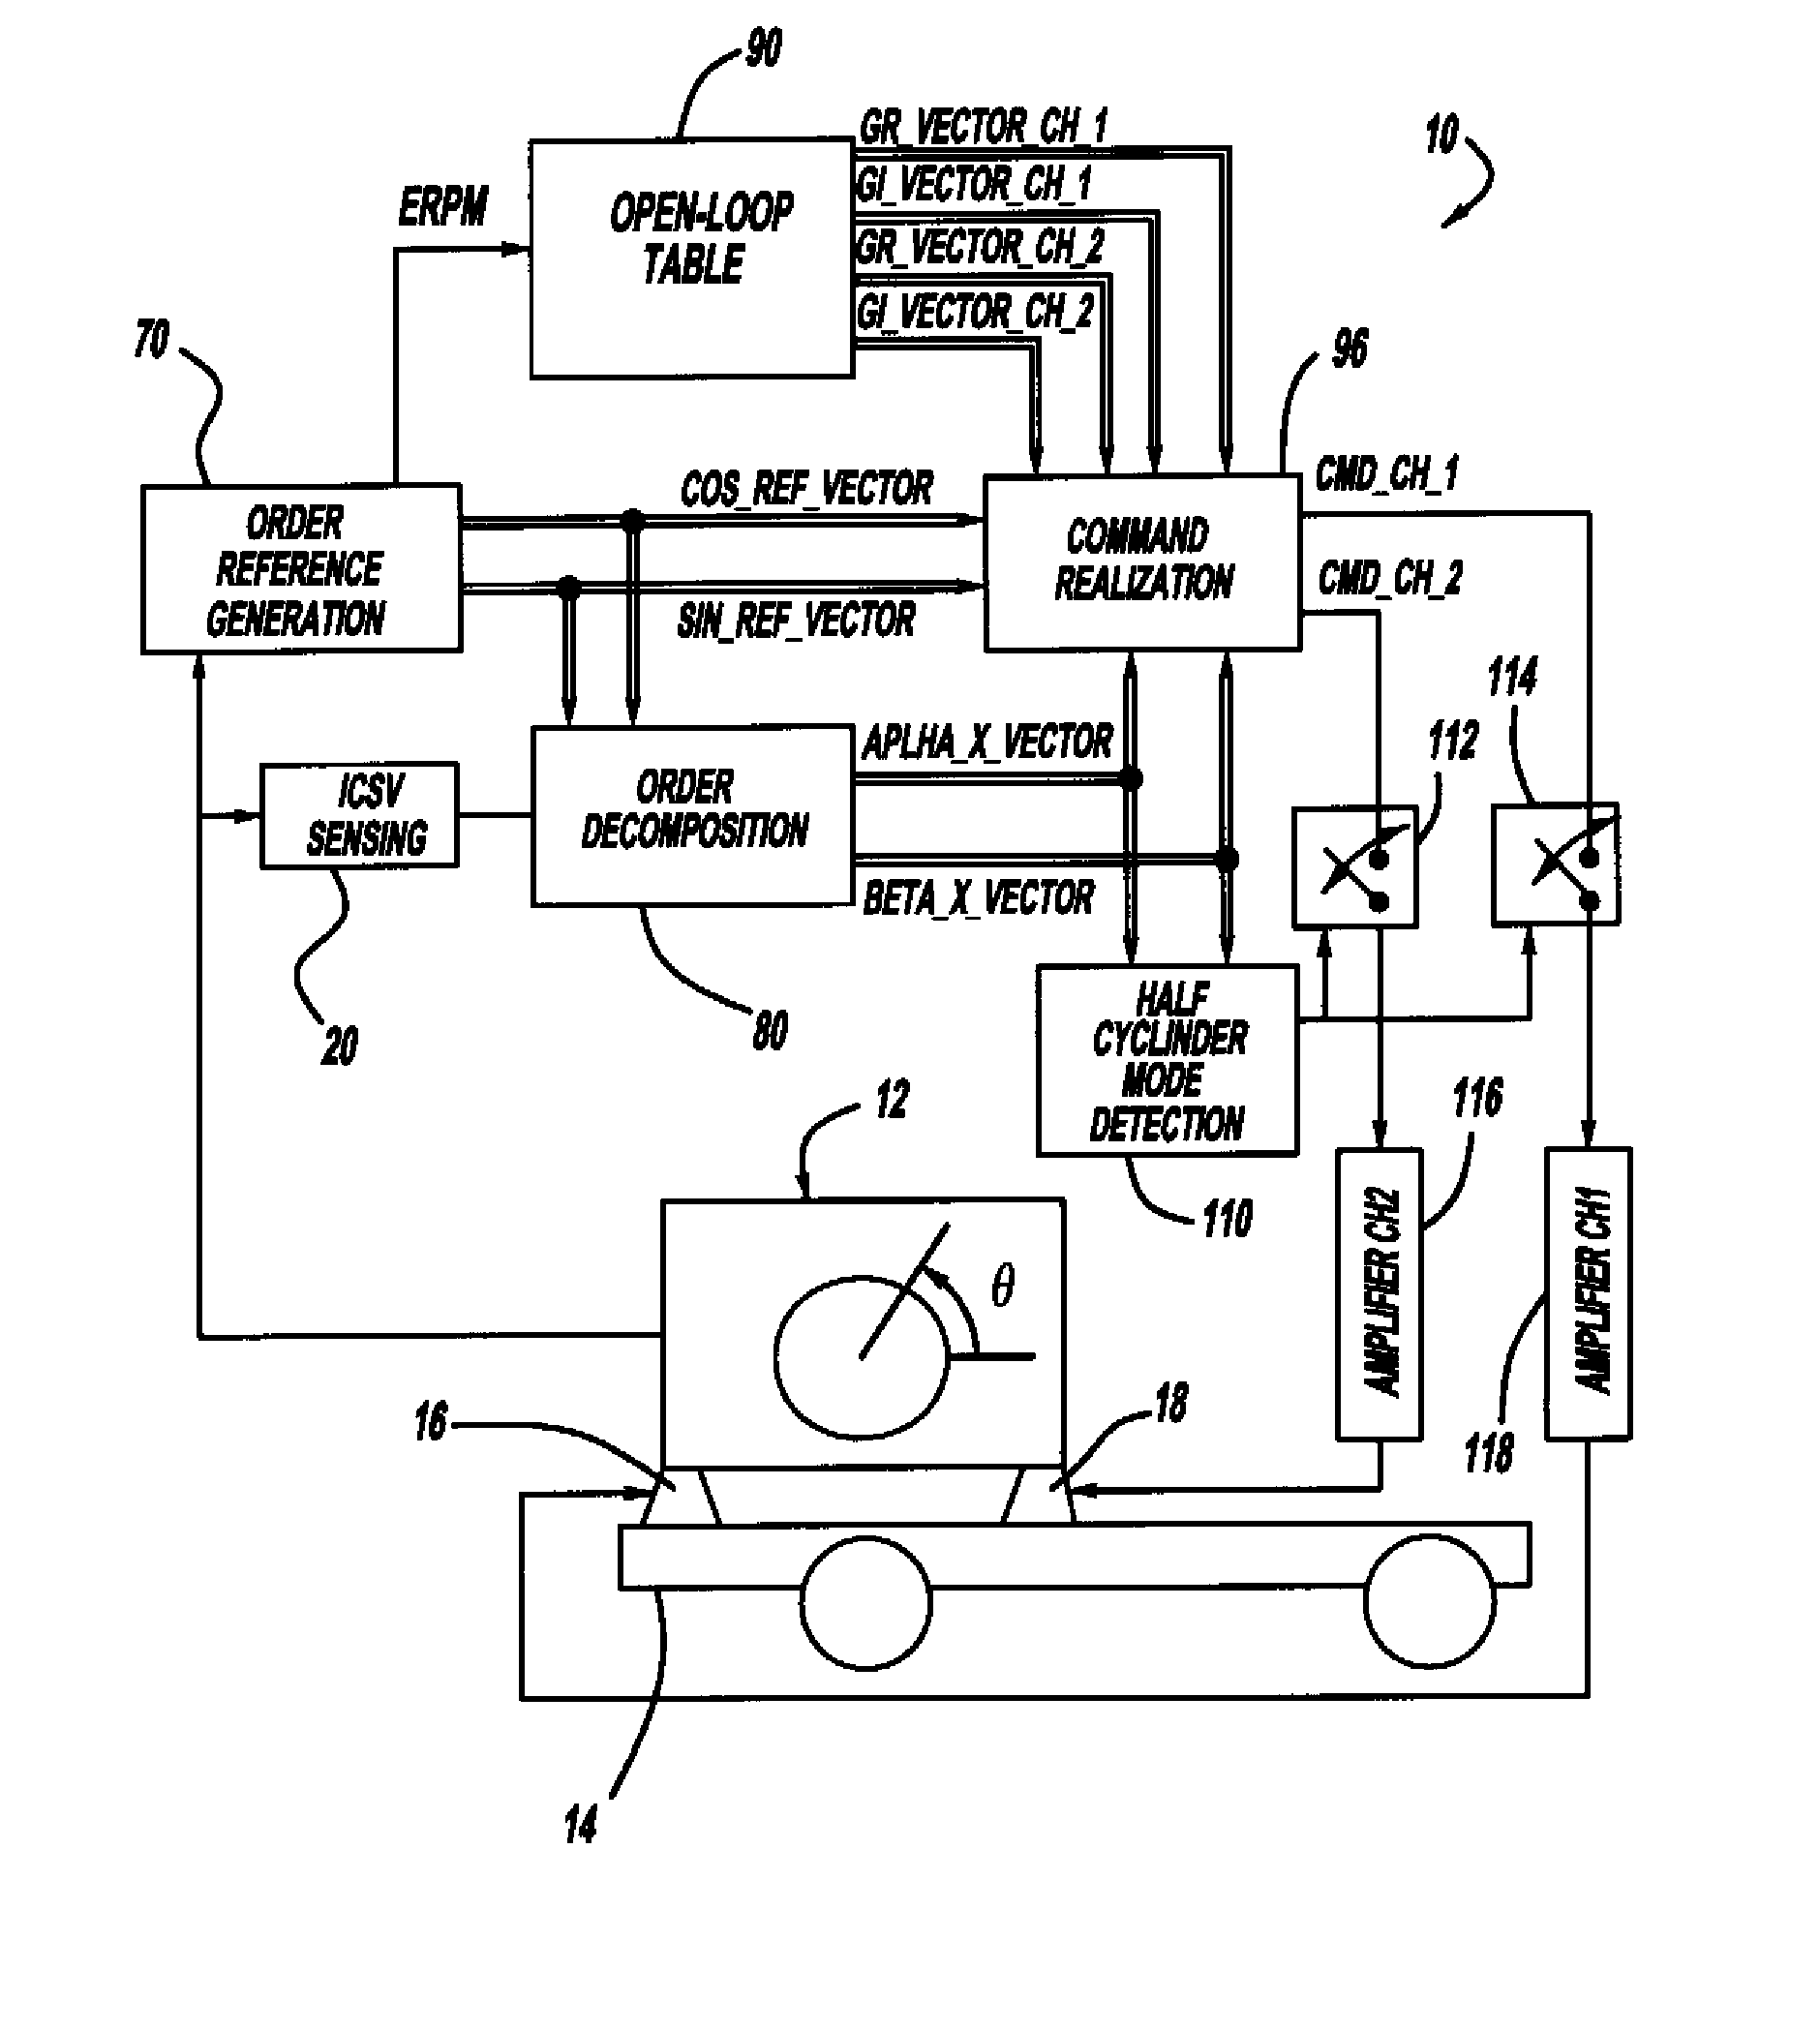 Open-loop control method for cancelling engine induced noise and vibration